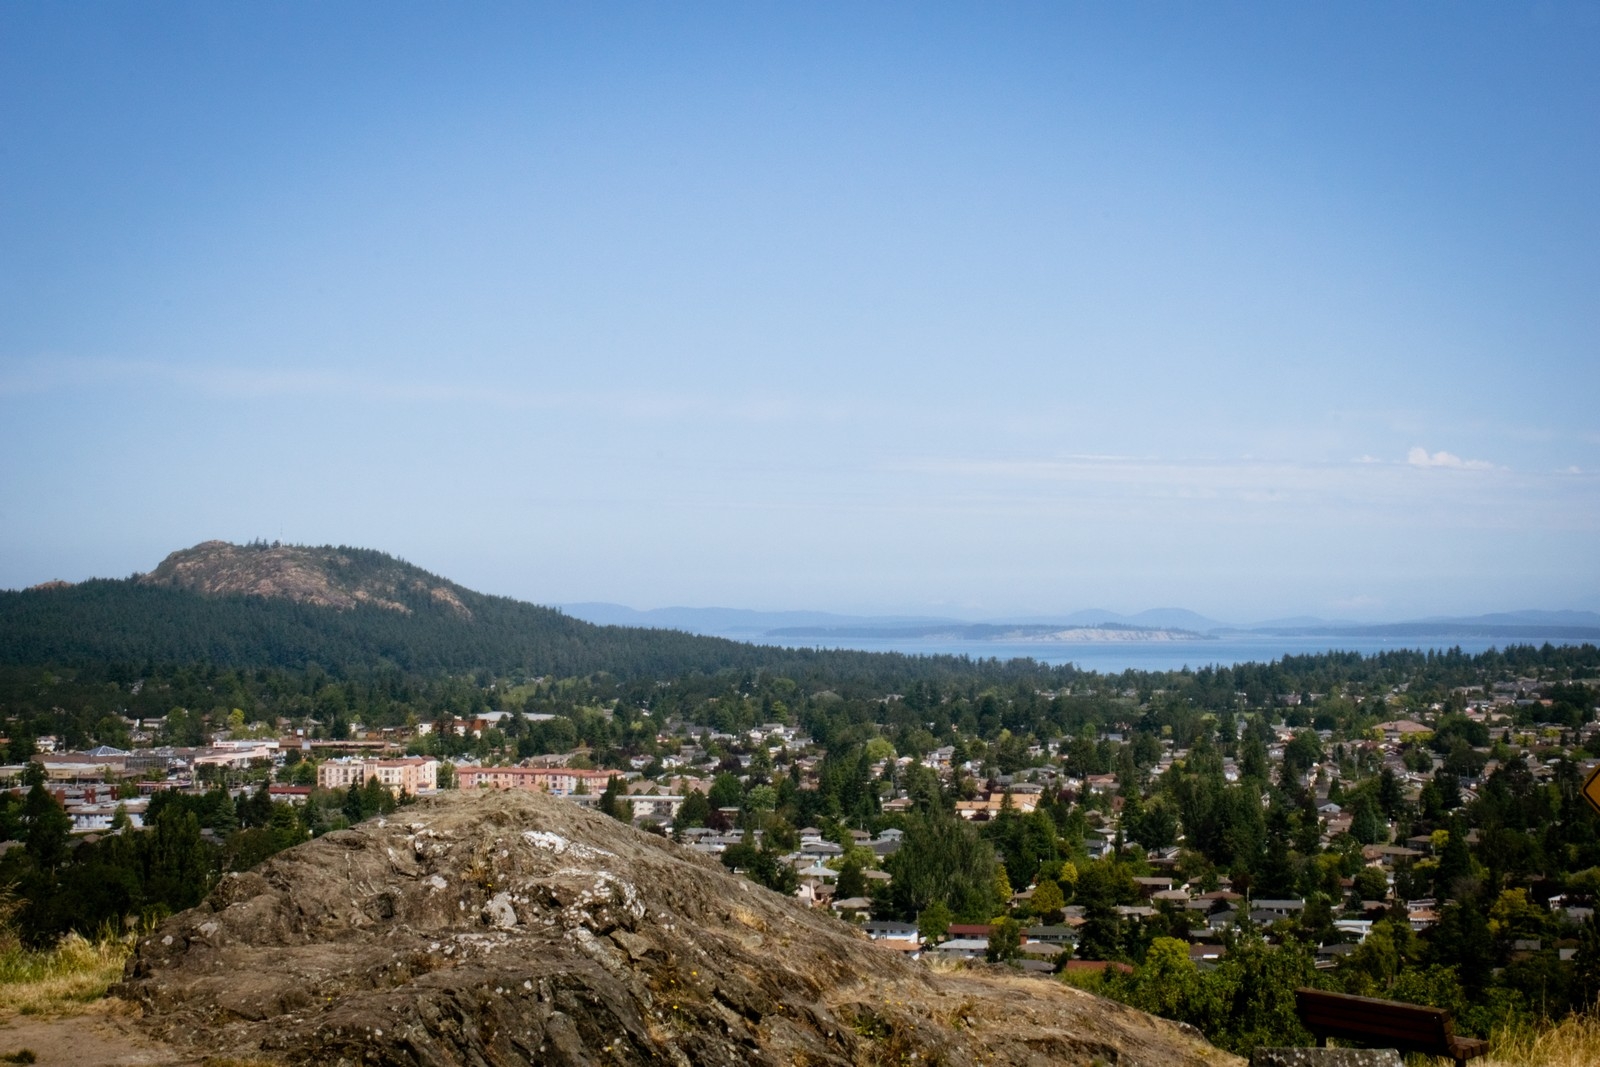 https://res.cloudinary.com/see-sight-tours/image/upload/v1581441875/View-from-Mount-Tolmie-Victoria-BC.jpg